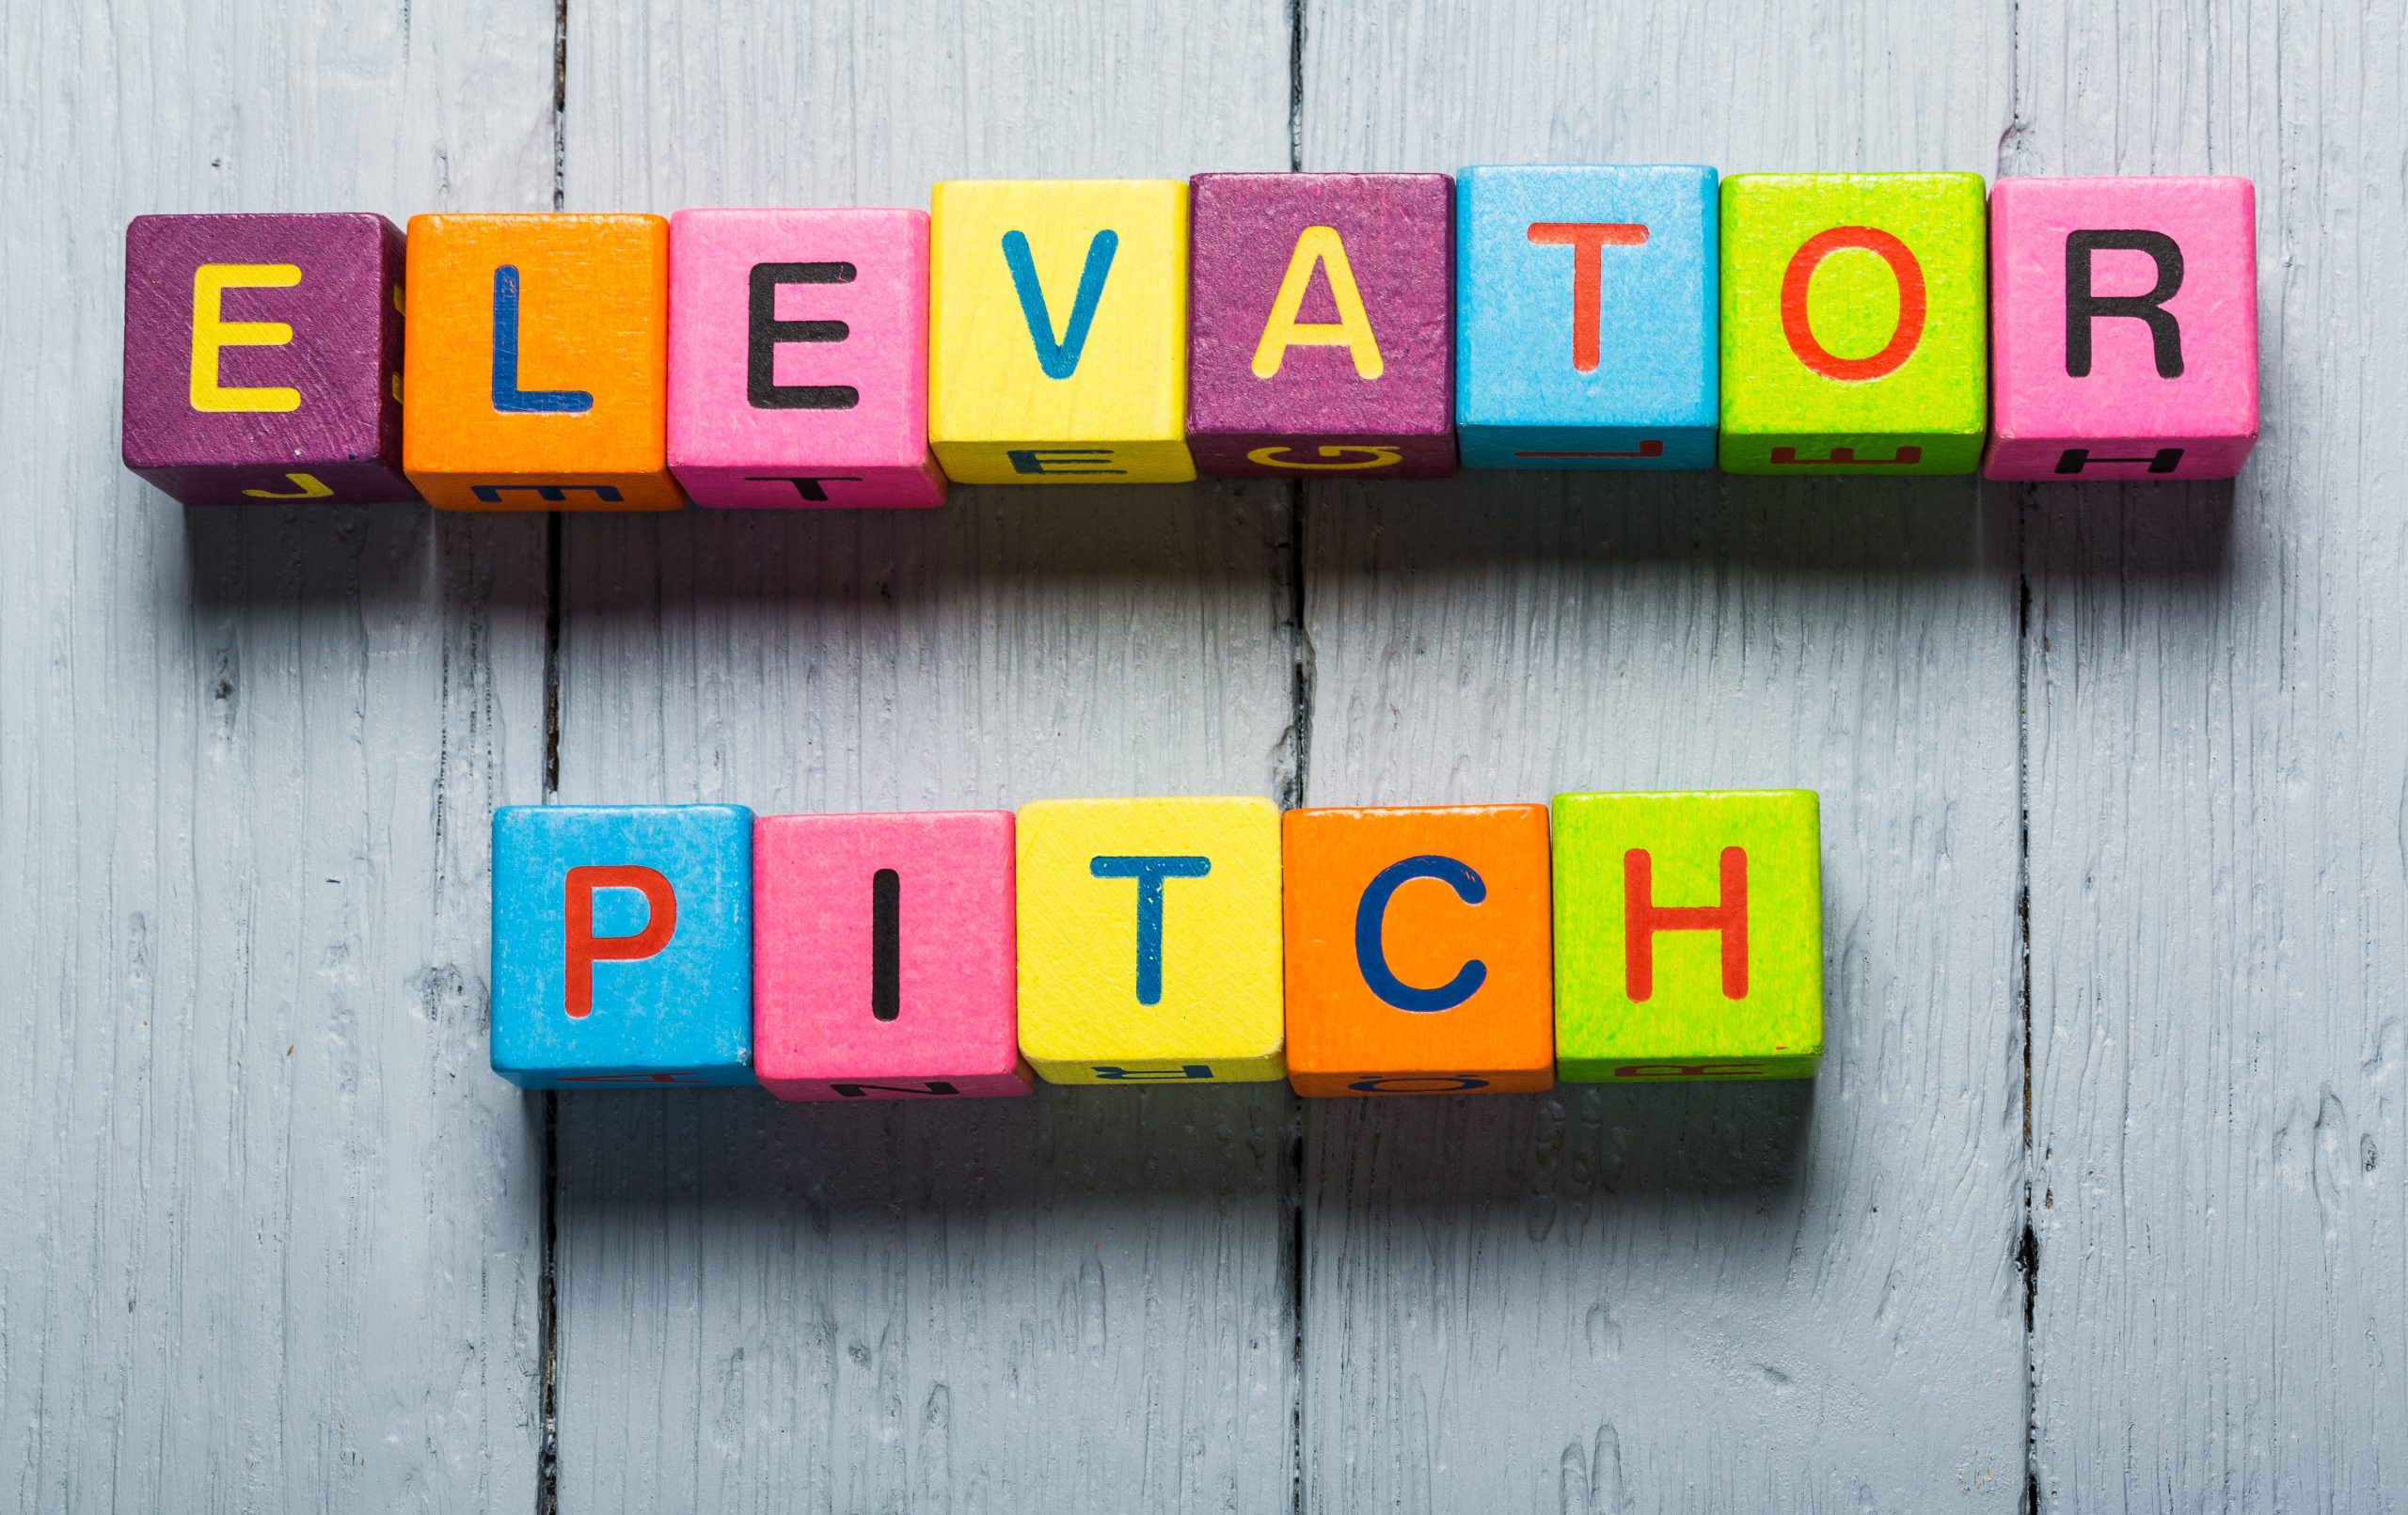 mastering-the-elevator-speech-how-to-effectively-pitch-your-ideas